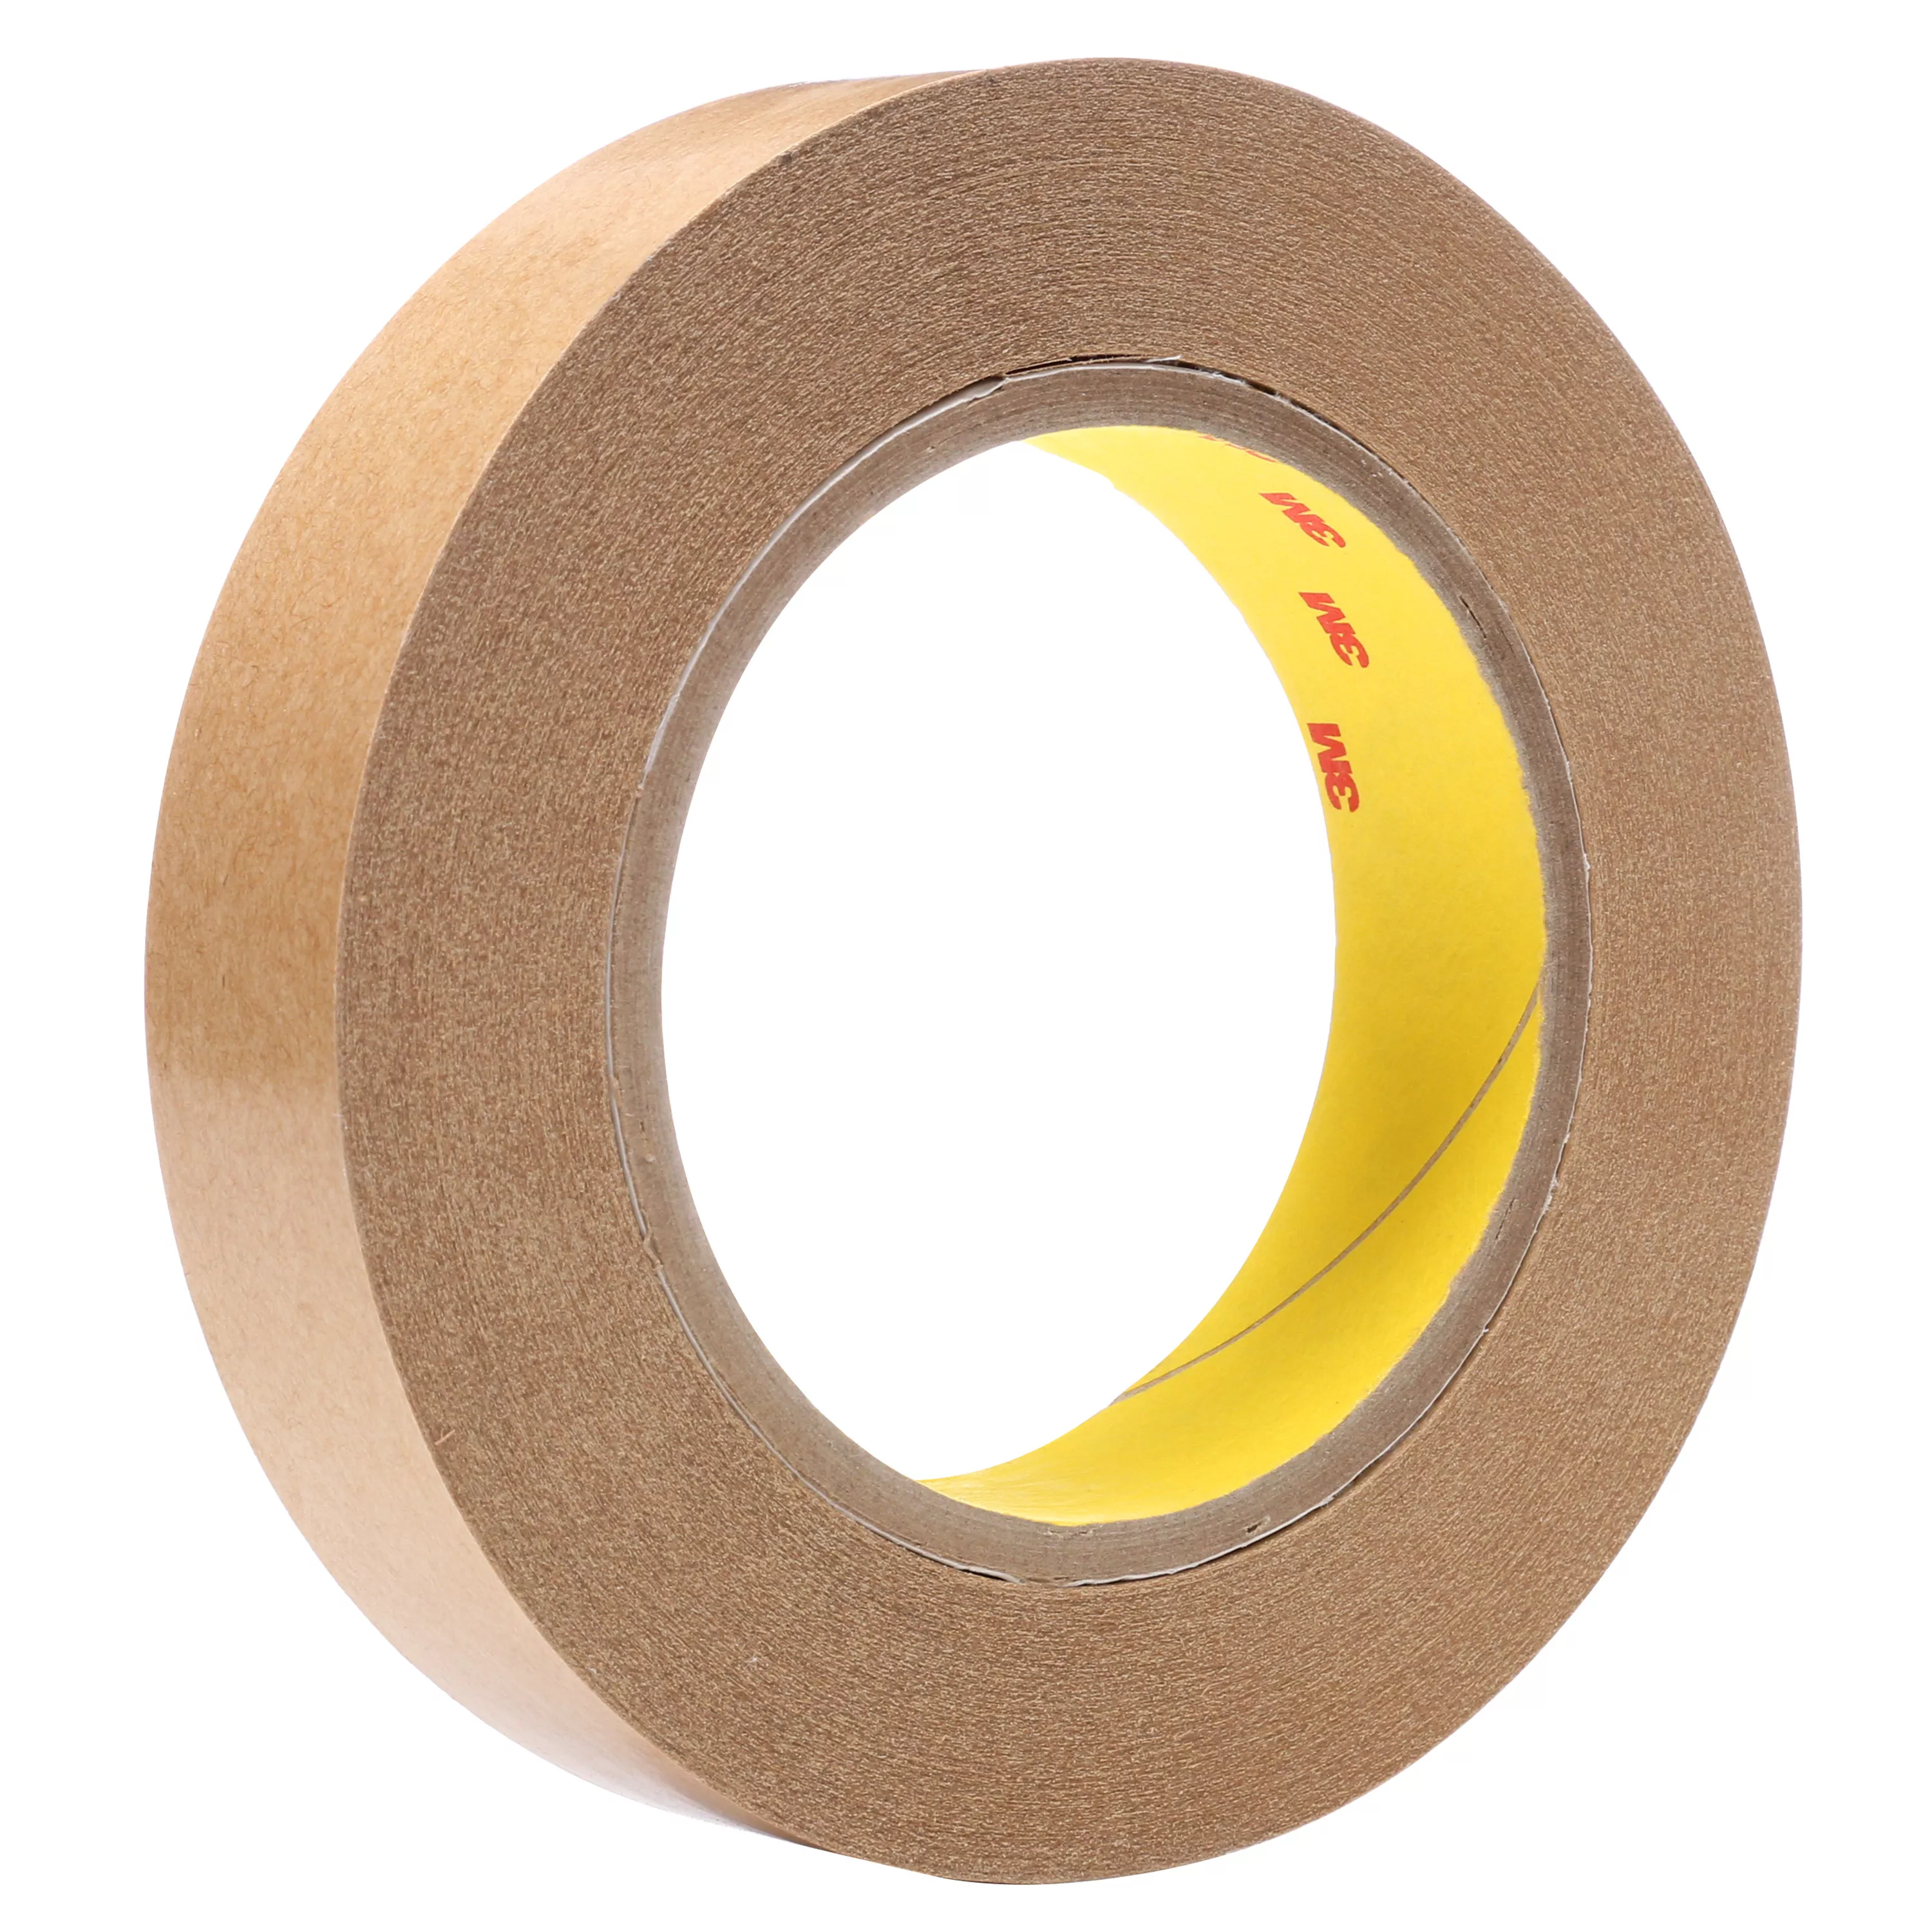 3M™ Adhesive Transfer Tape 465, Clear, 1 in x 60 yd, 2 mil, 36 Roll/Case